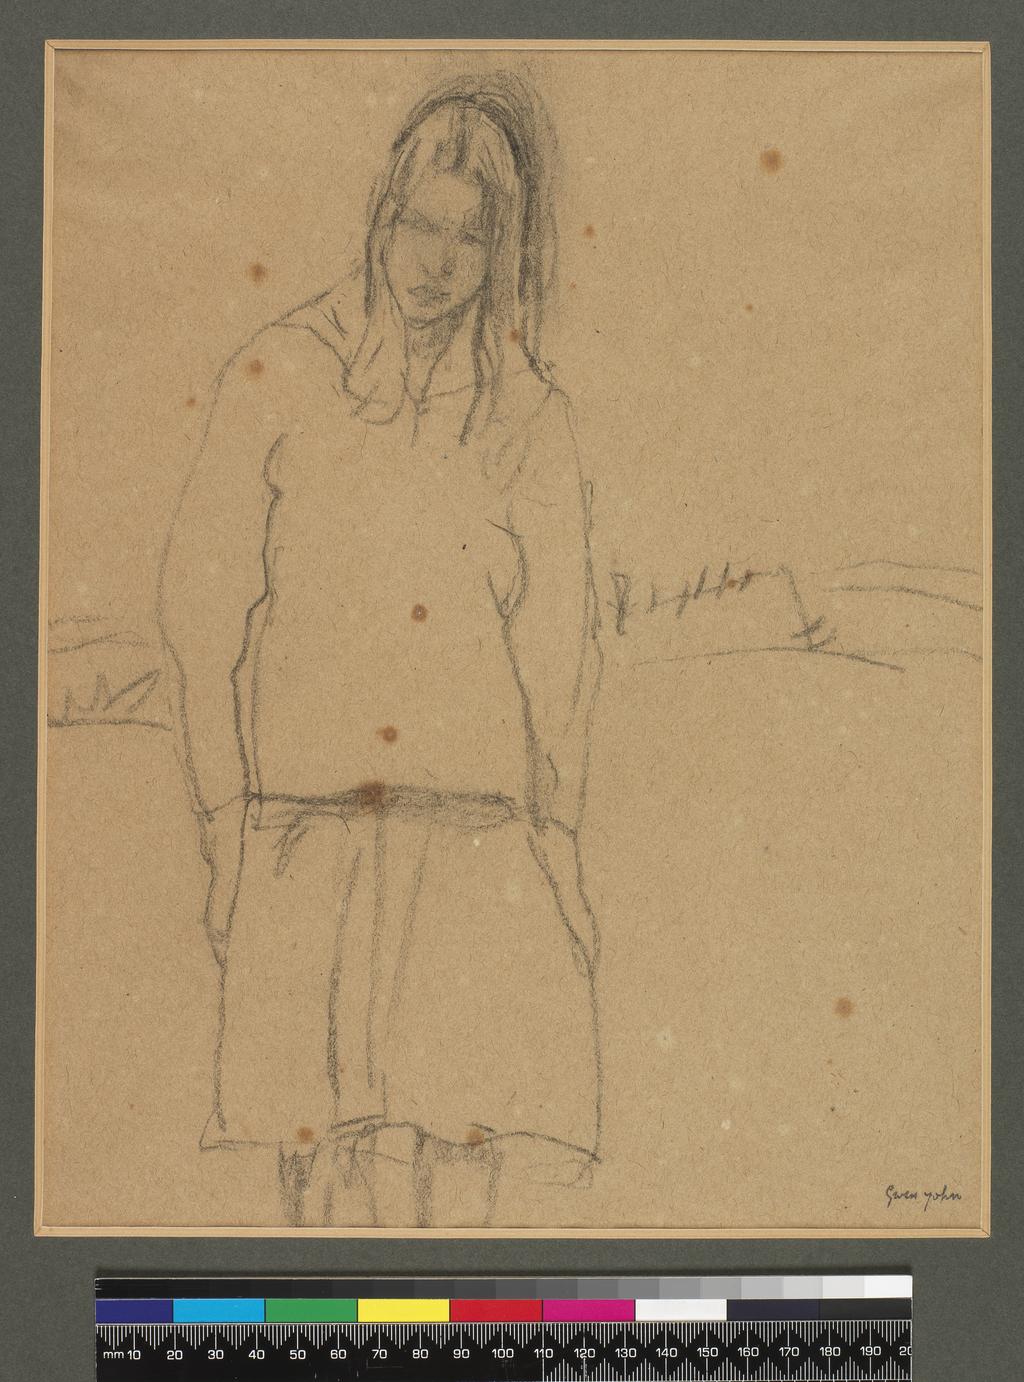 An image of An adolescent girl, standing in a landscape. John, Gwen (British, 1876-1939). Charcoal on pale buff paper. Batchelor Collection. Post-conservation image.